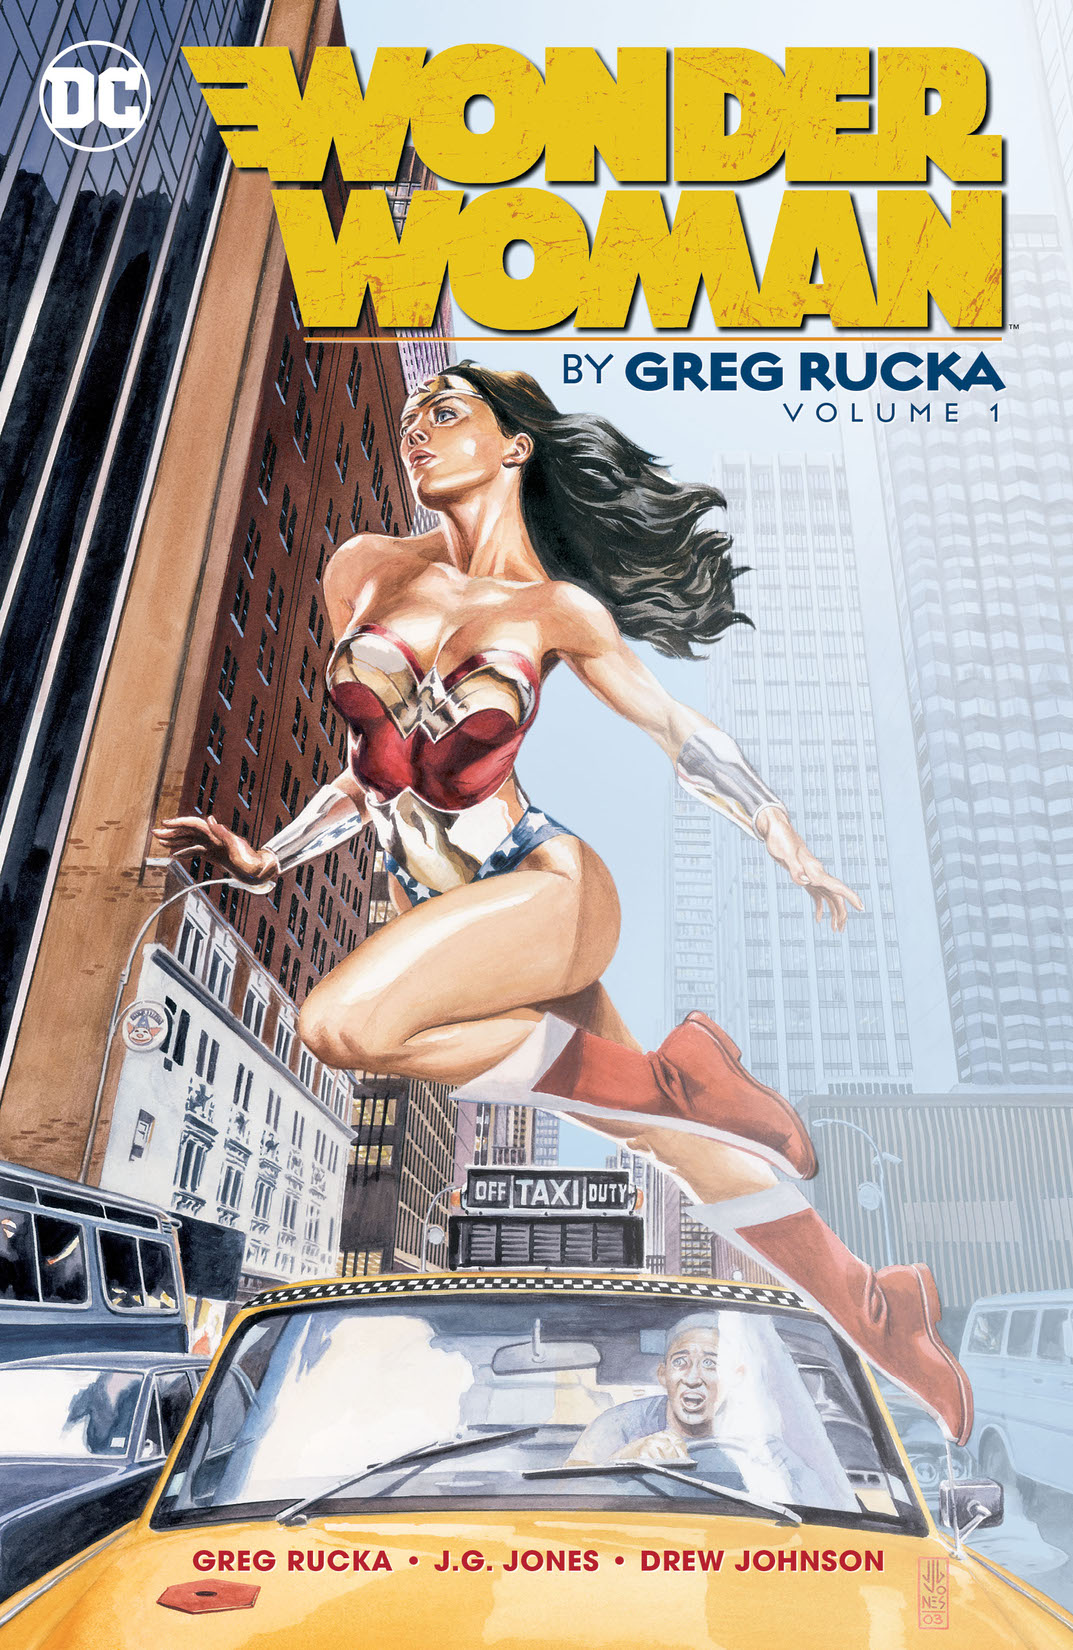 Wonder Woman By Greg Rucka Vol. 1 preview images